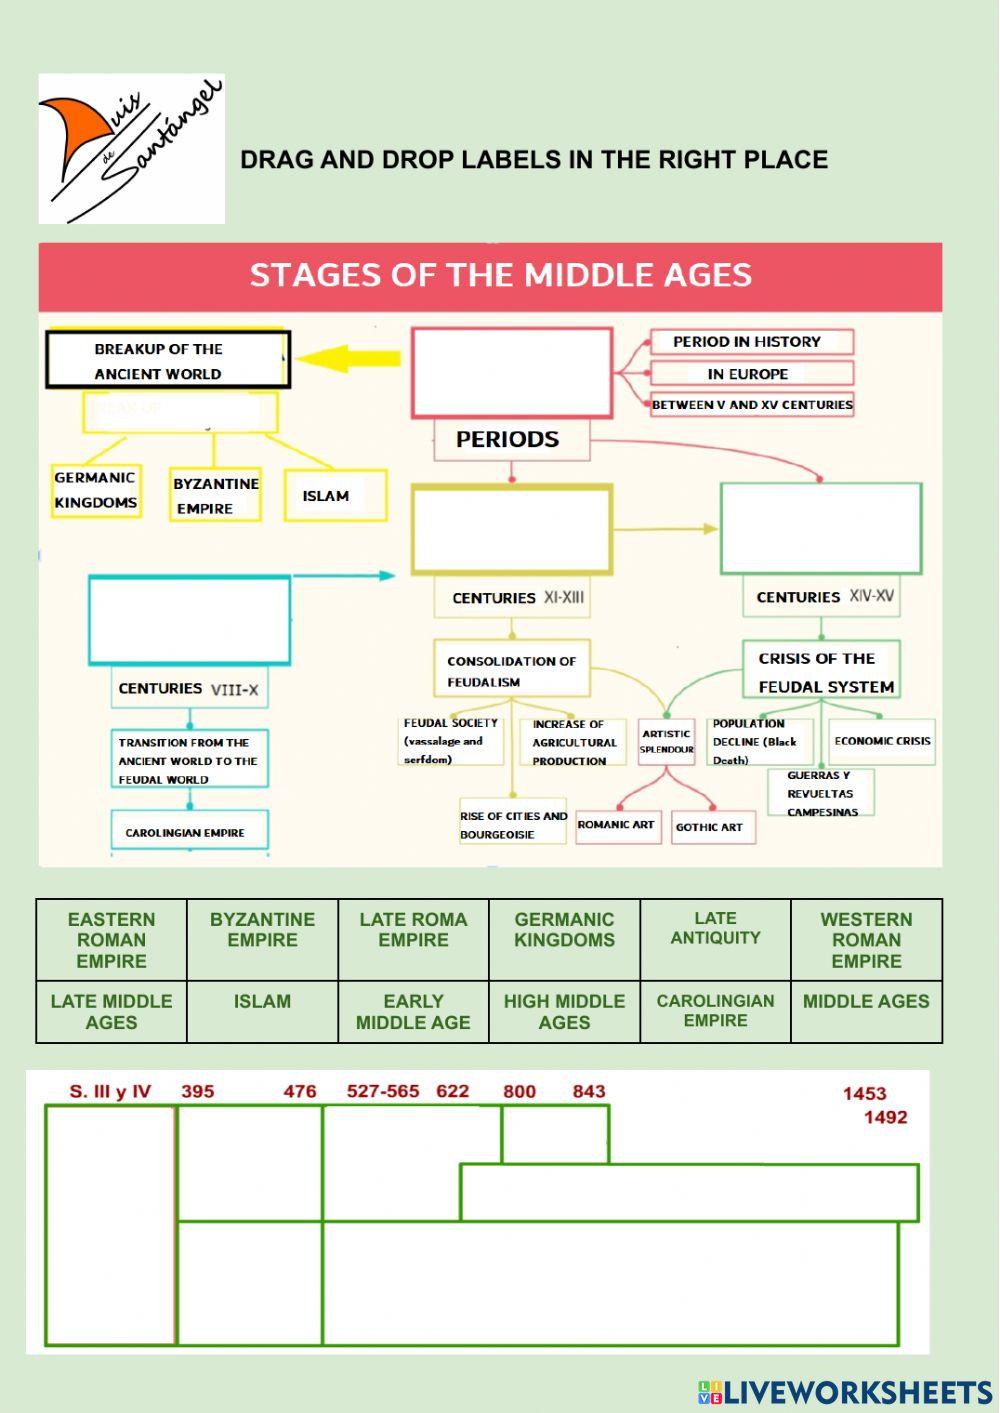 Stages of the middle ages